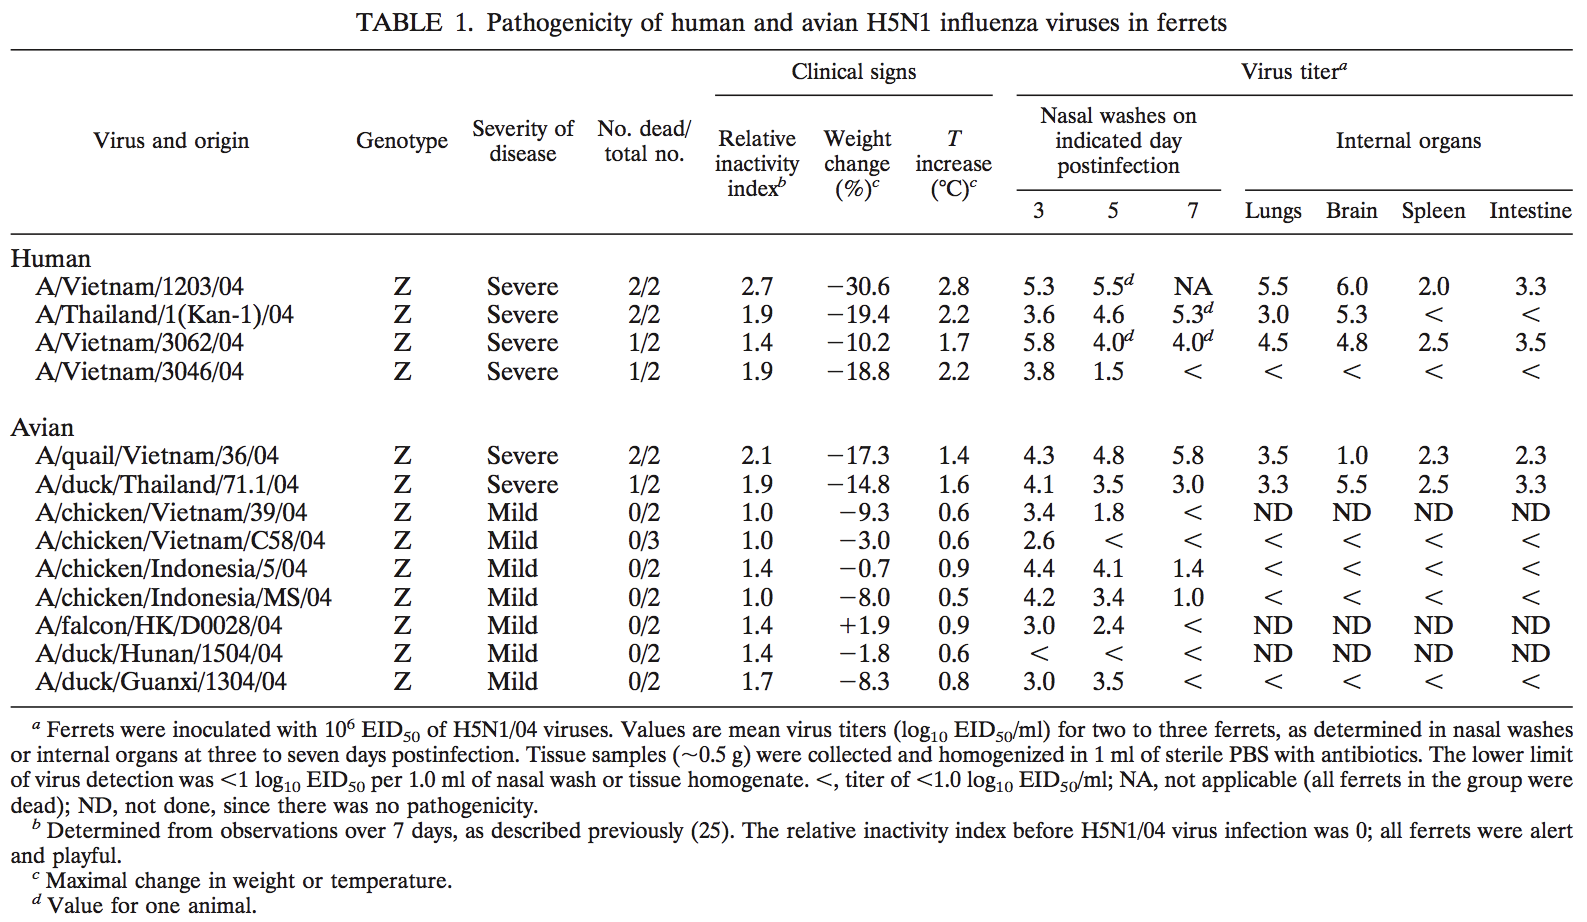 Table 1 from Govorkova et al., illustrating phenotypic data from animal experiments that will be used to train the ML algorithm.